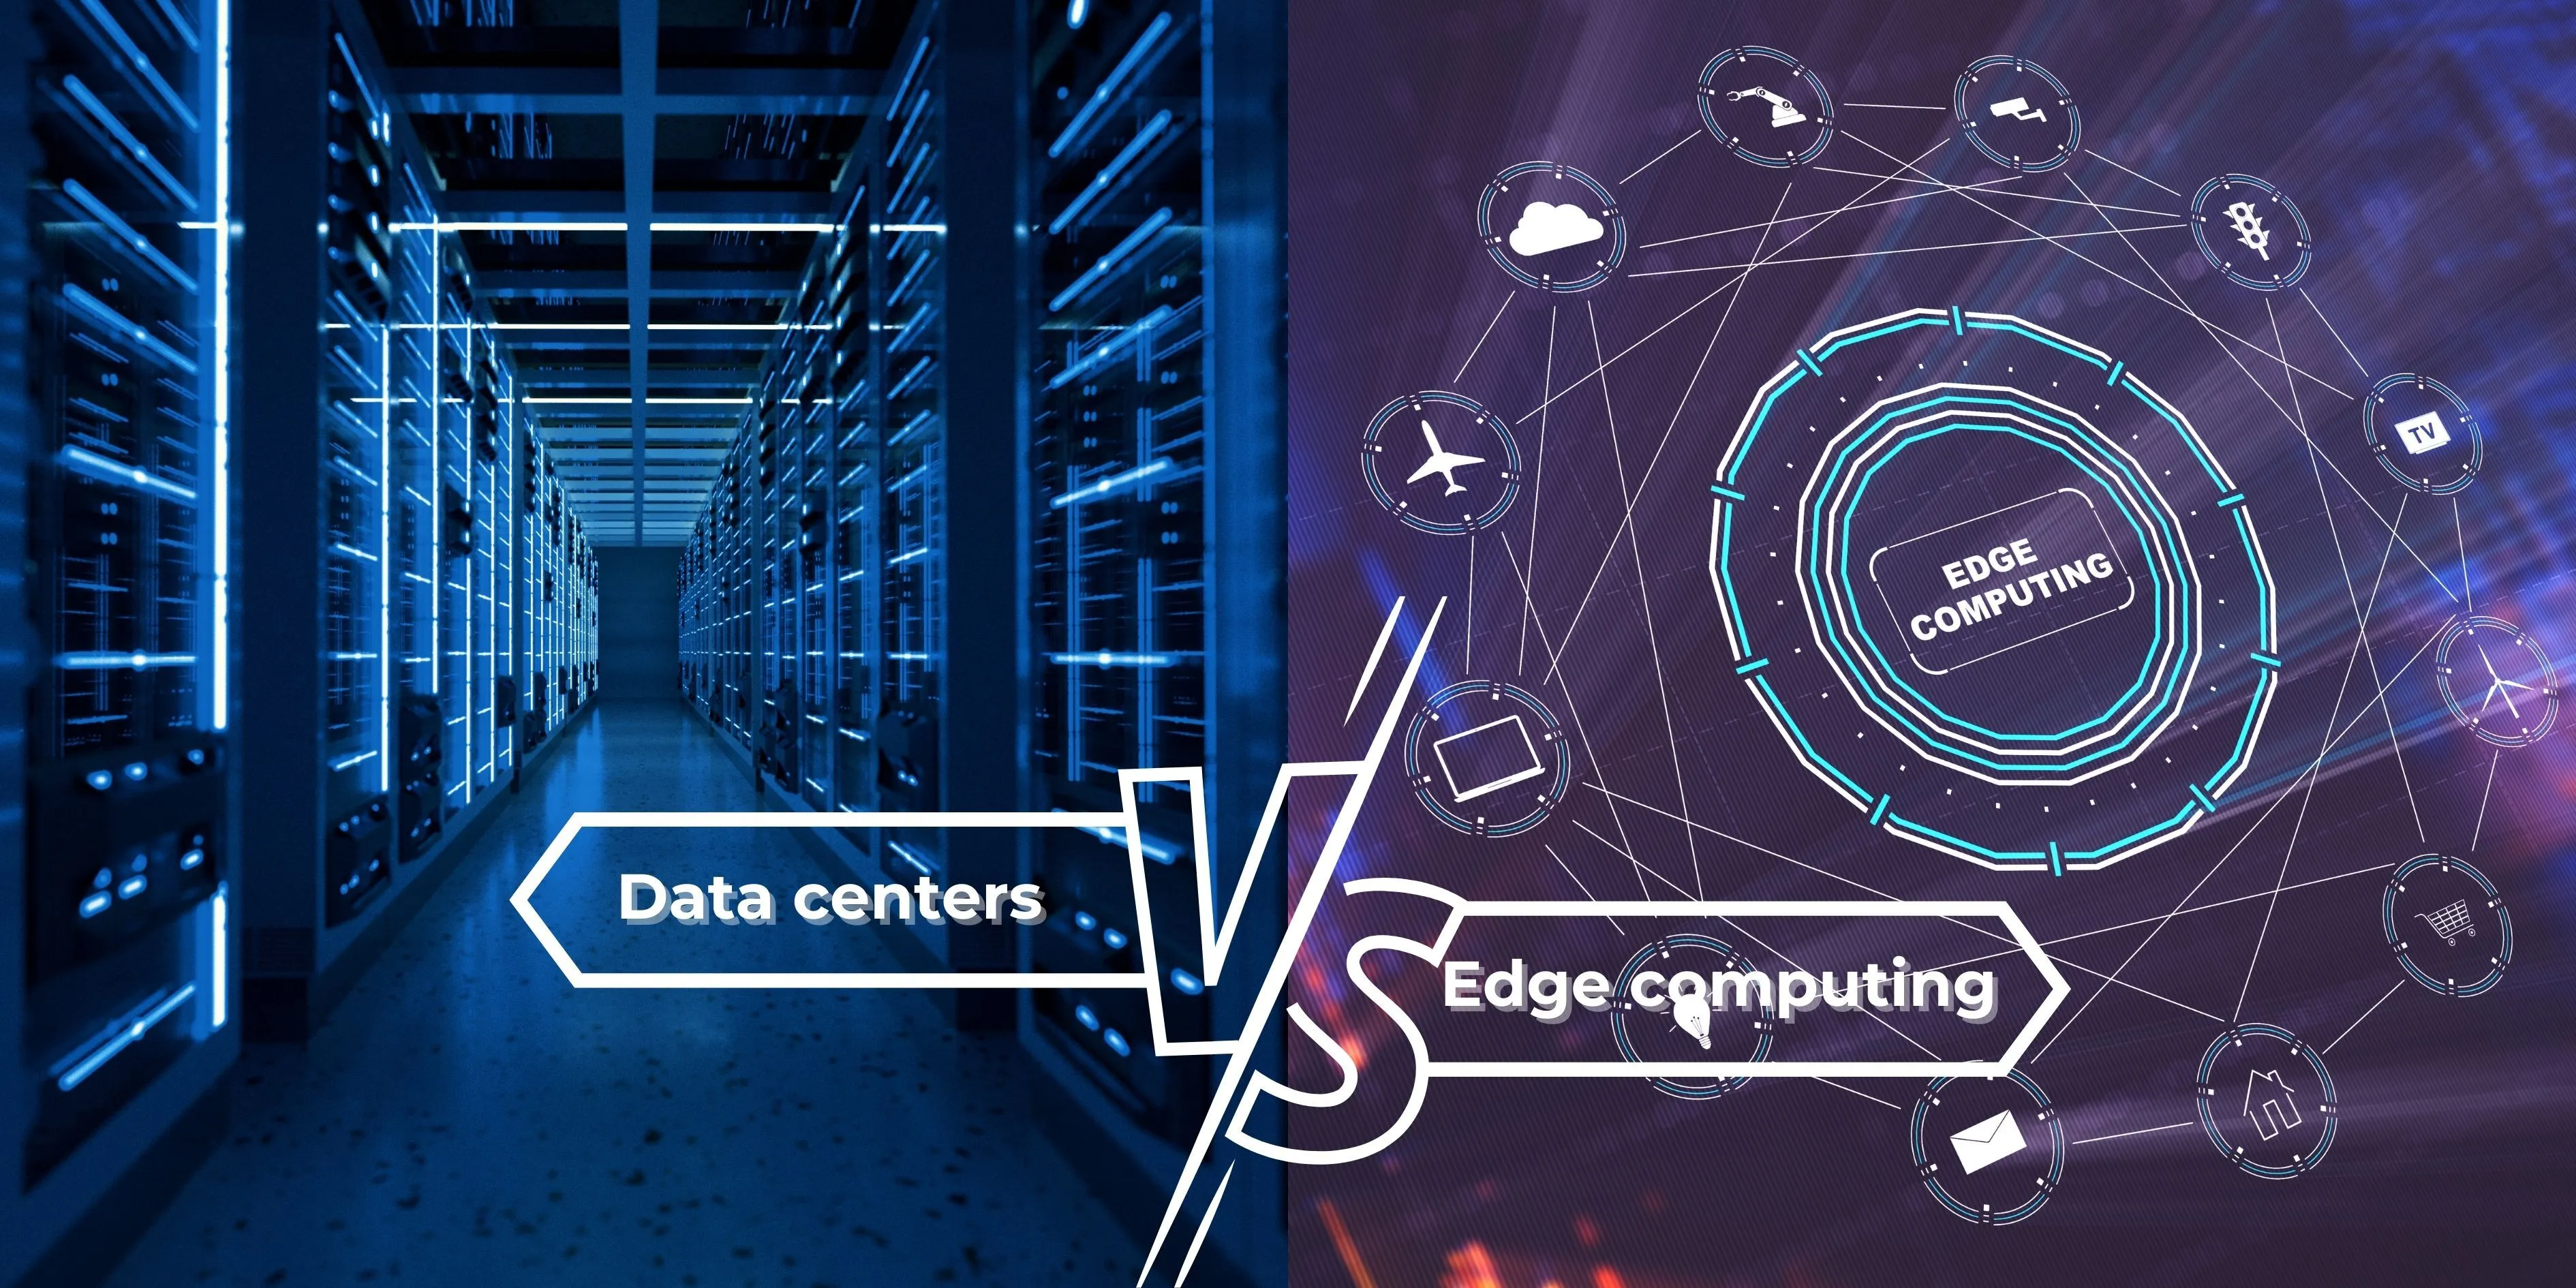 digicor newsletter Shaping the Future: Data Centers, Cloud Computing, and the Impact of Edge Computing